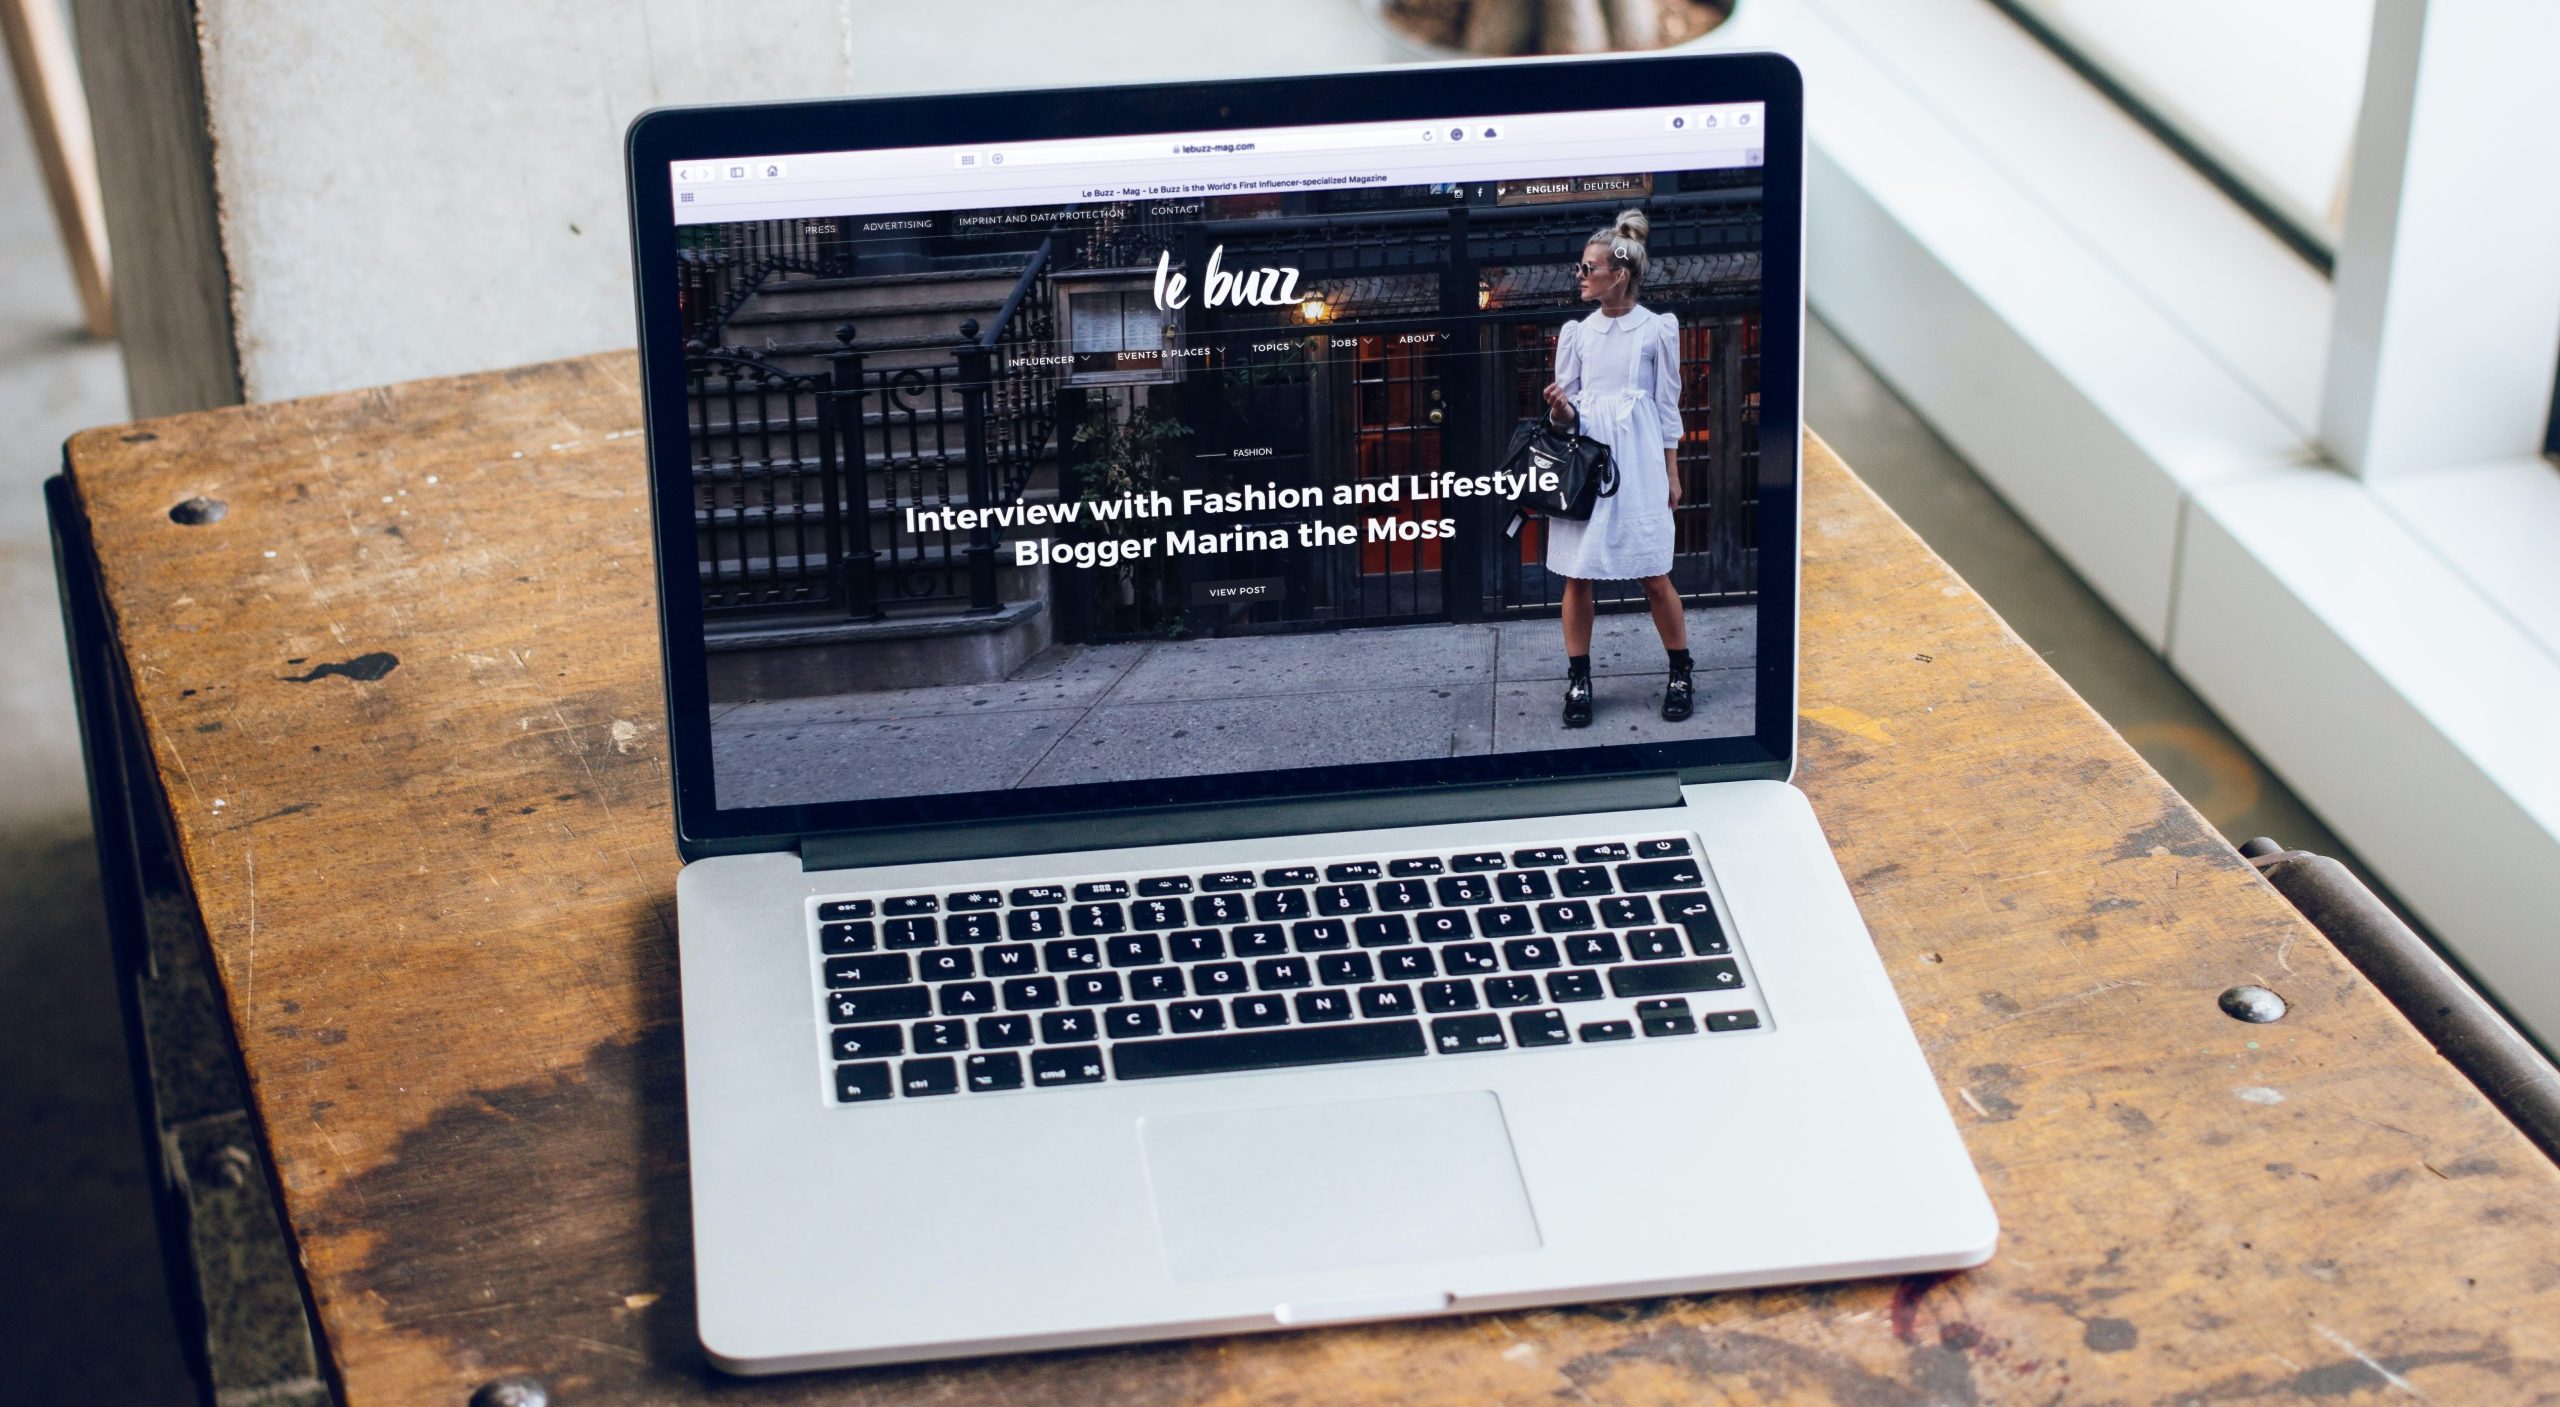 Laptop displaying a fashion website homepage.